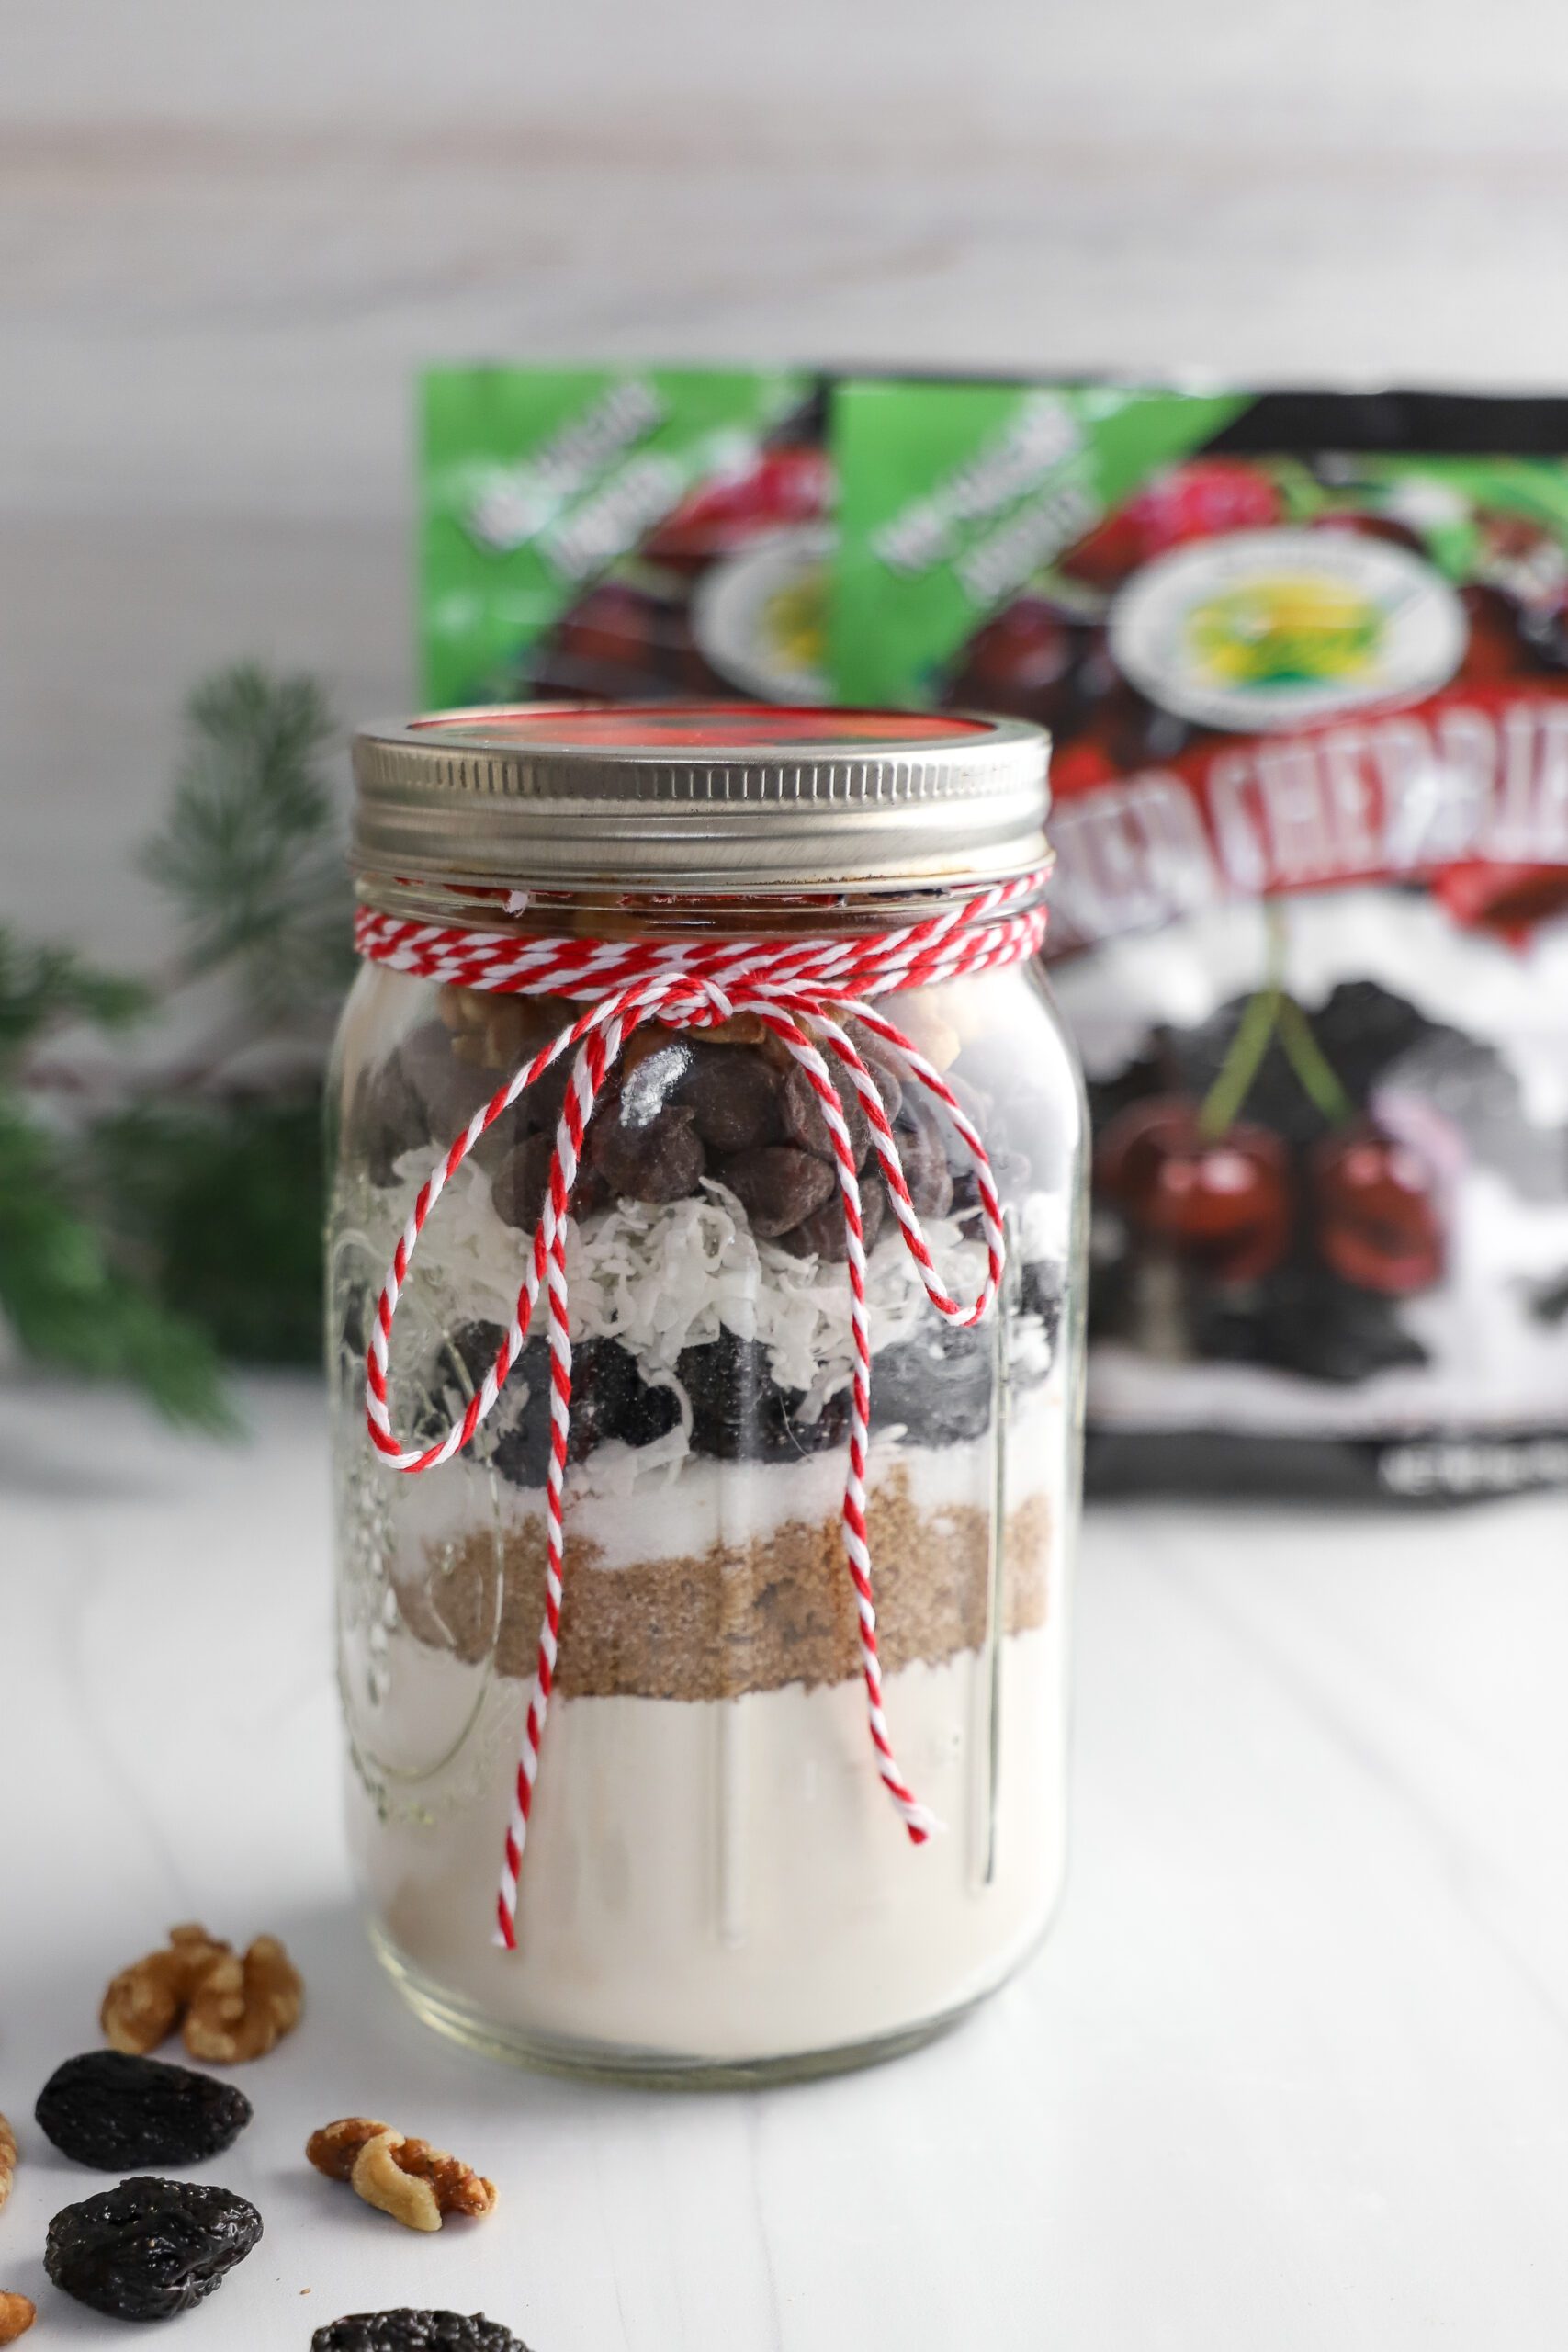 Dried Cherry and Chocolate Chip Cookie Mix in a Jar